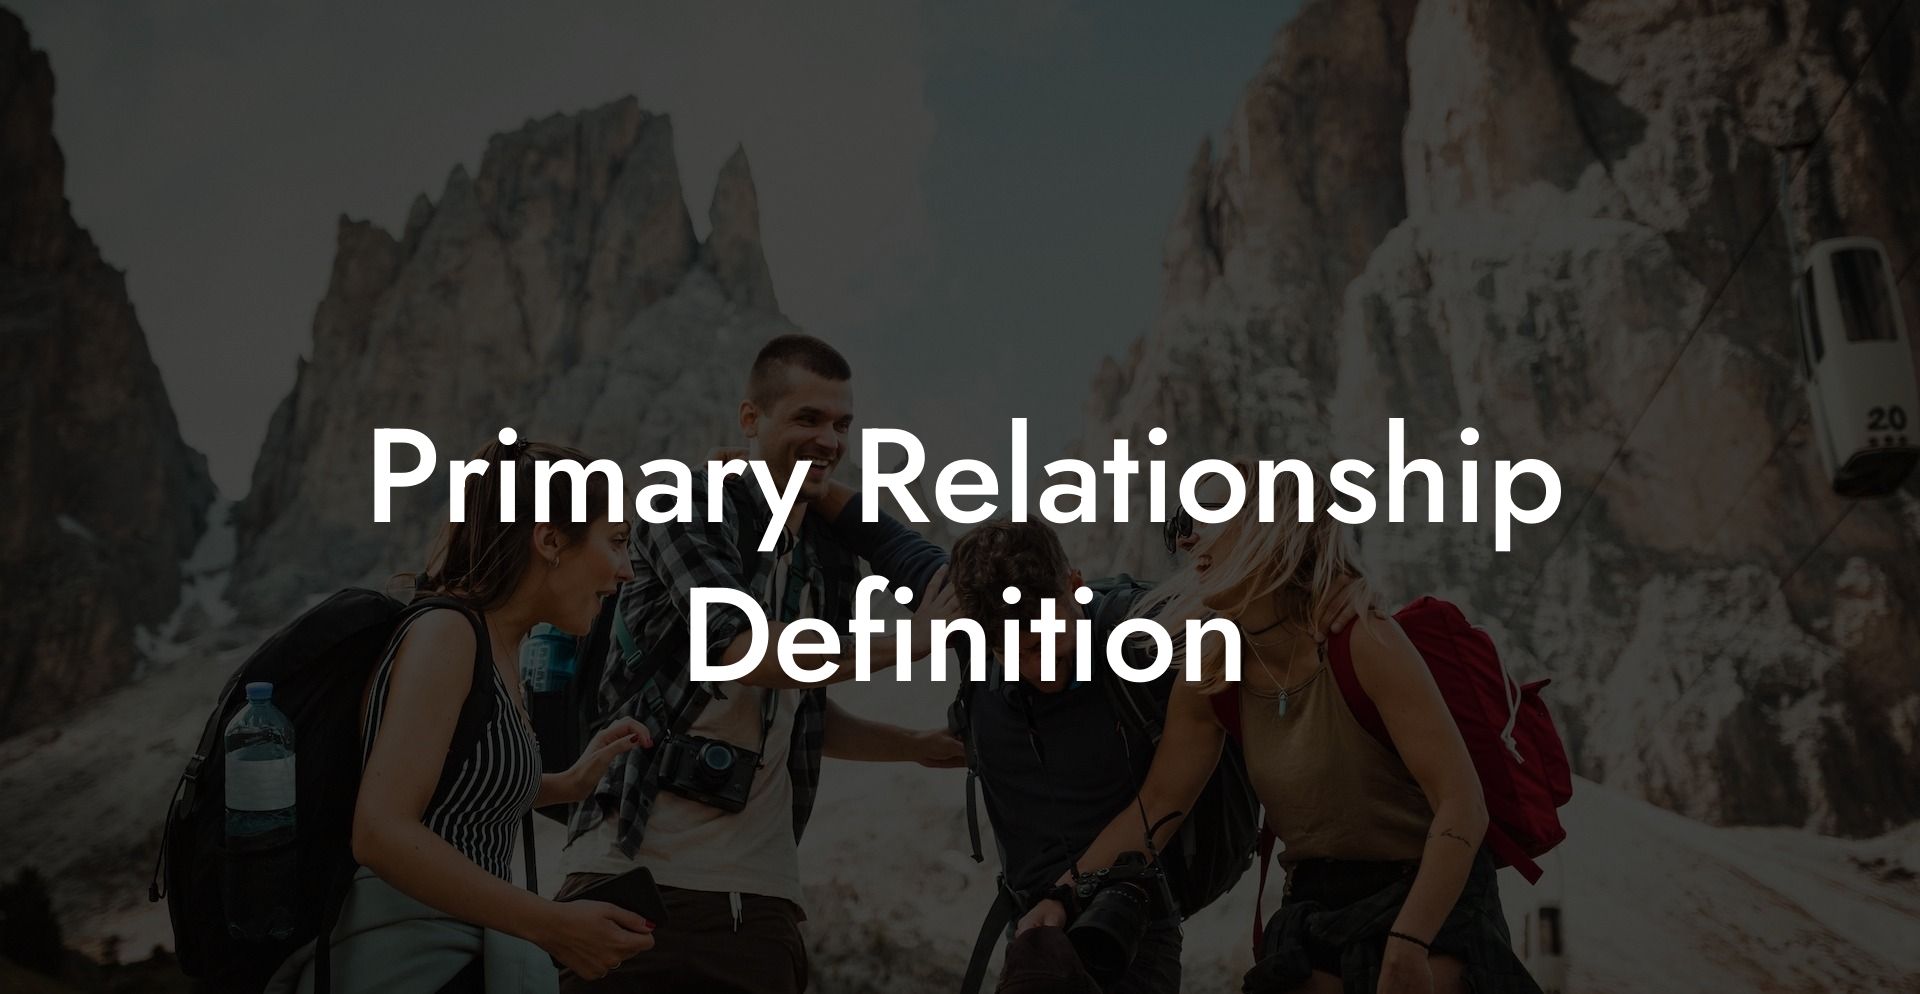 Primary Relationship Definition